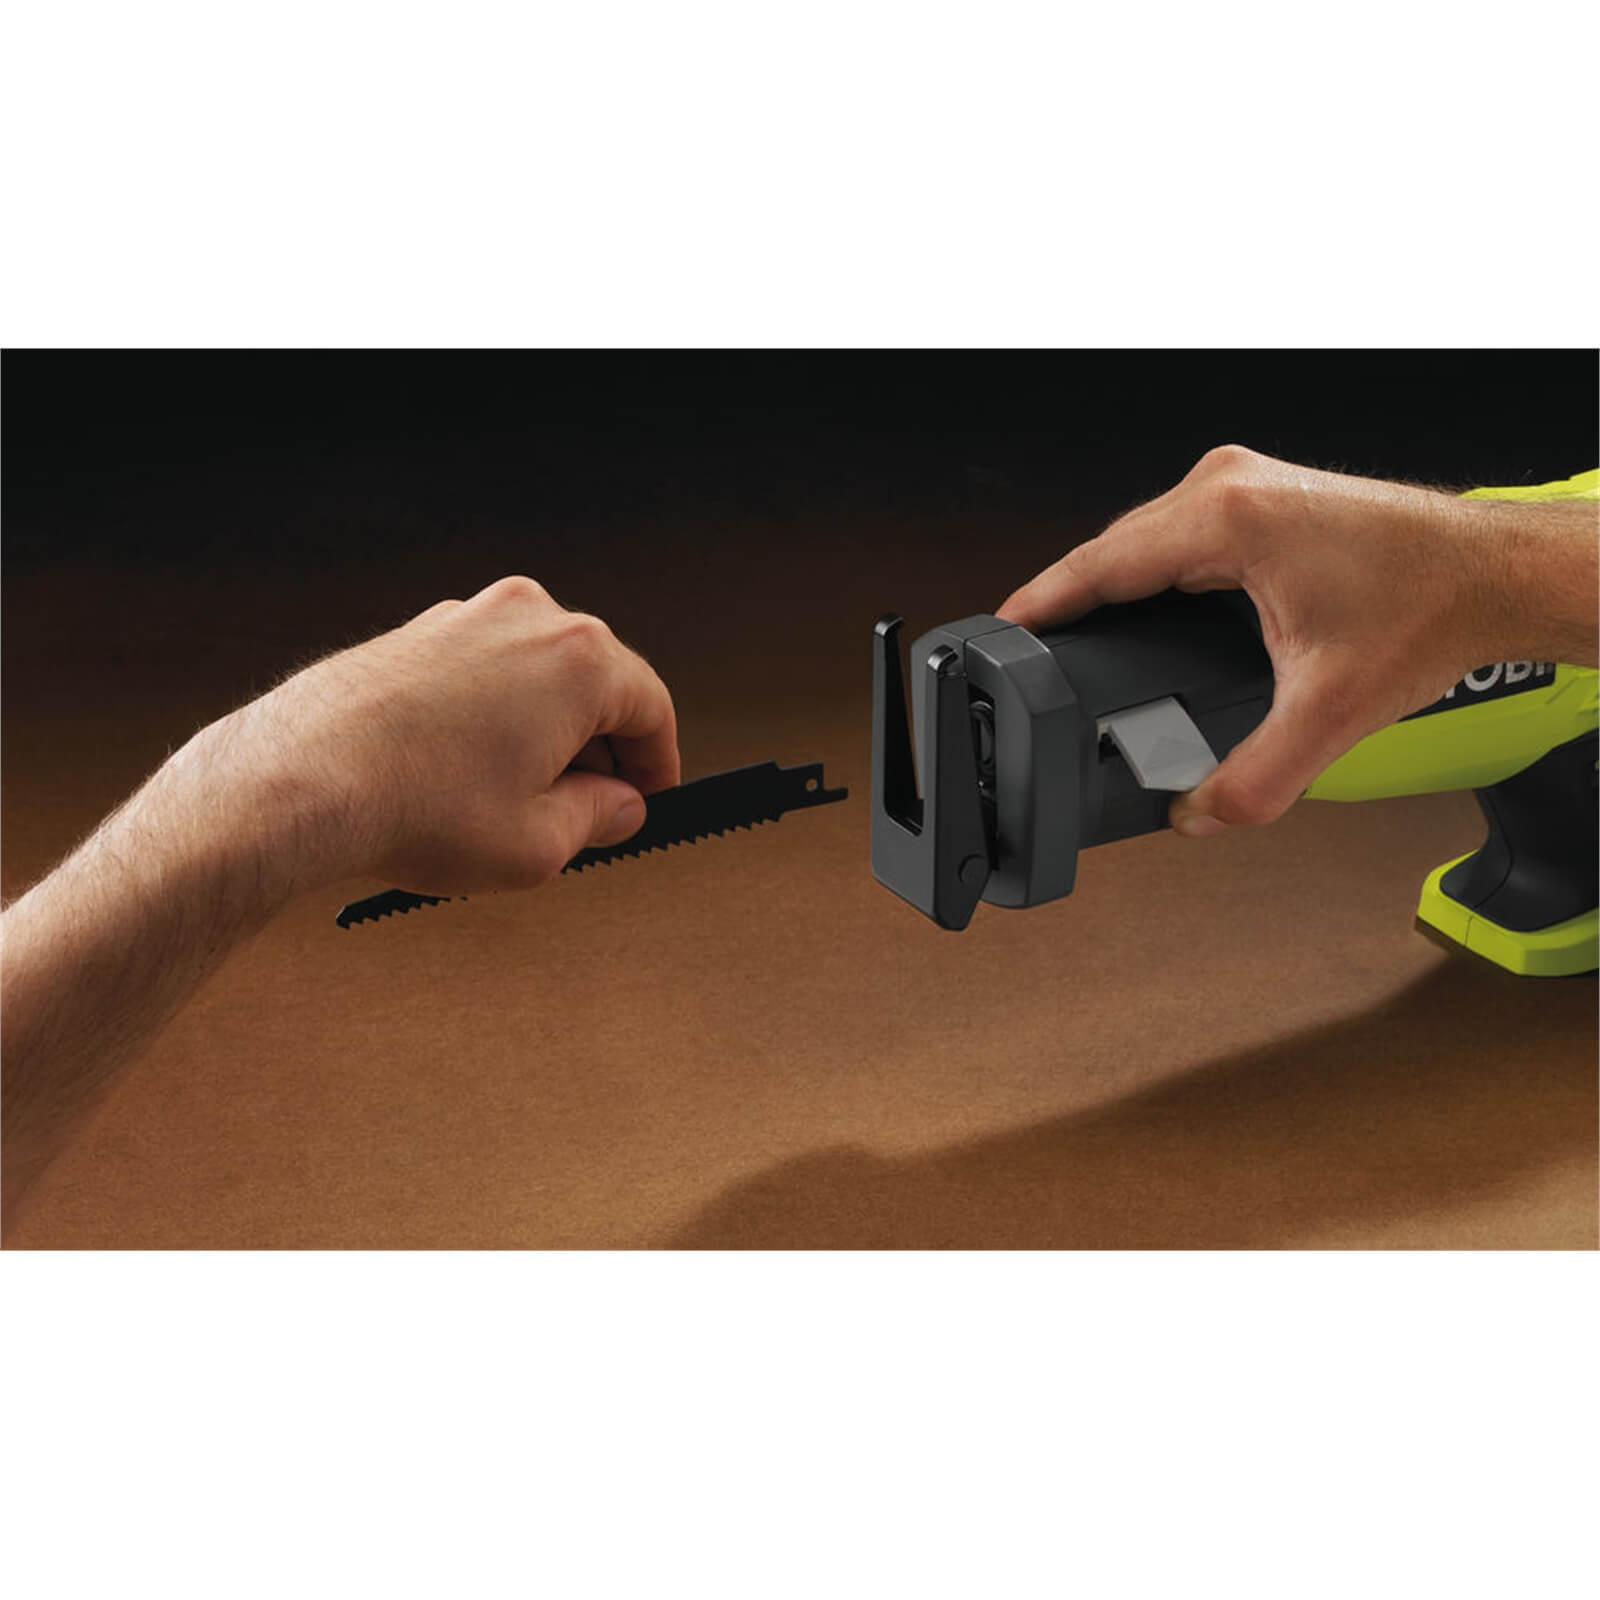 Ryobi ONE+ 18V Reciprocating Saw RRS1801 (Tool only)